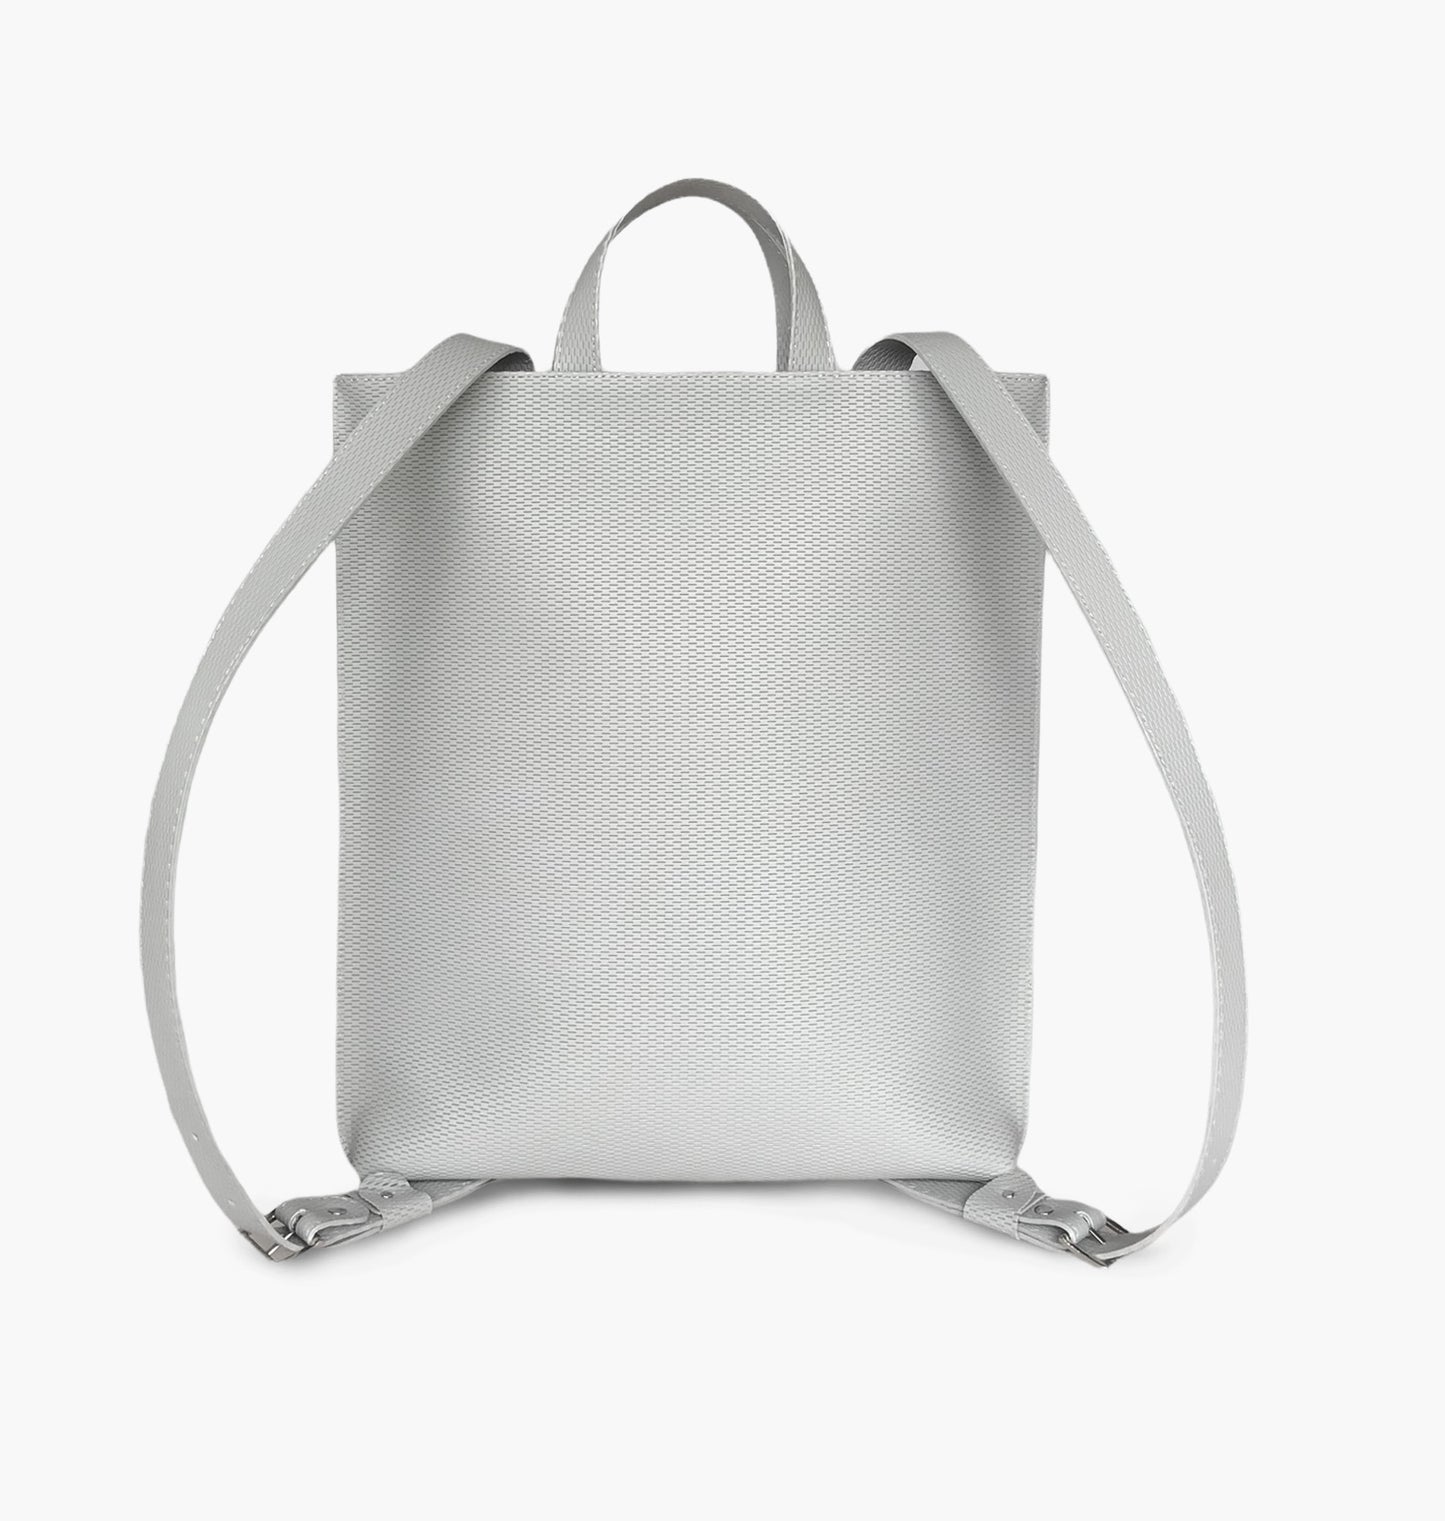 Réka backpack - gray with patterned surface